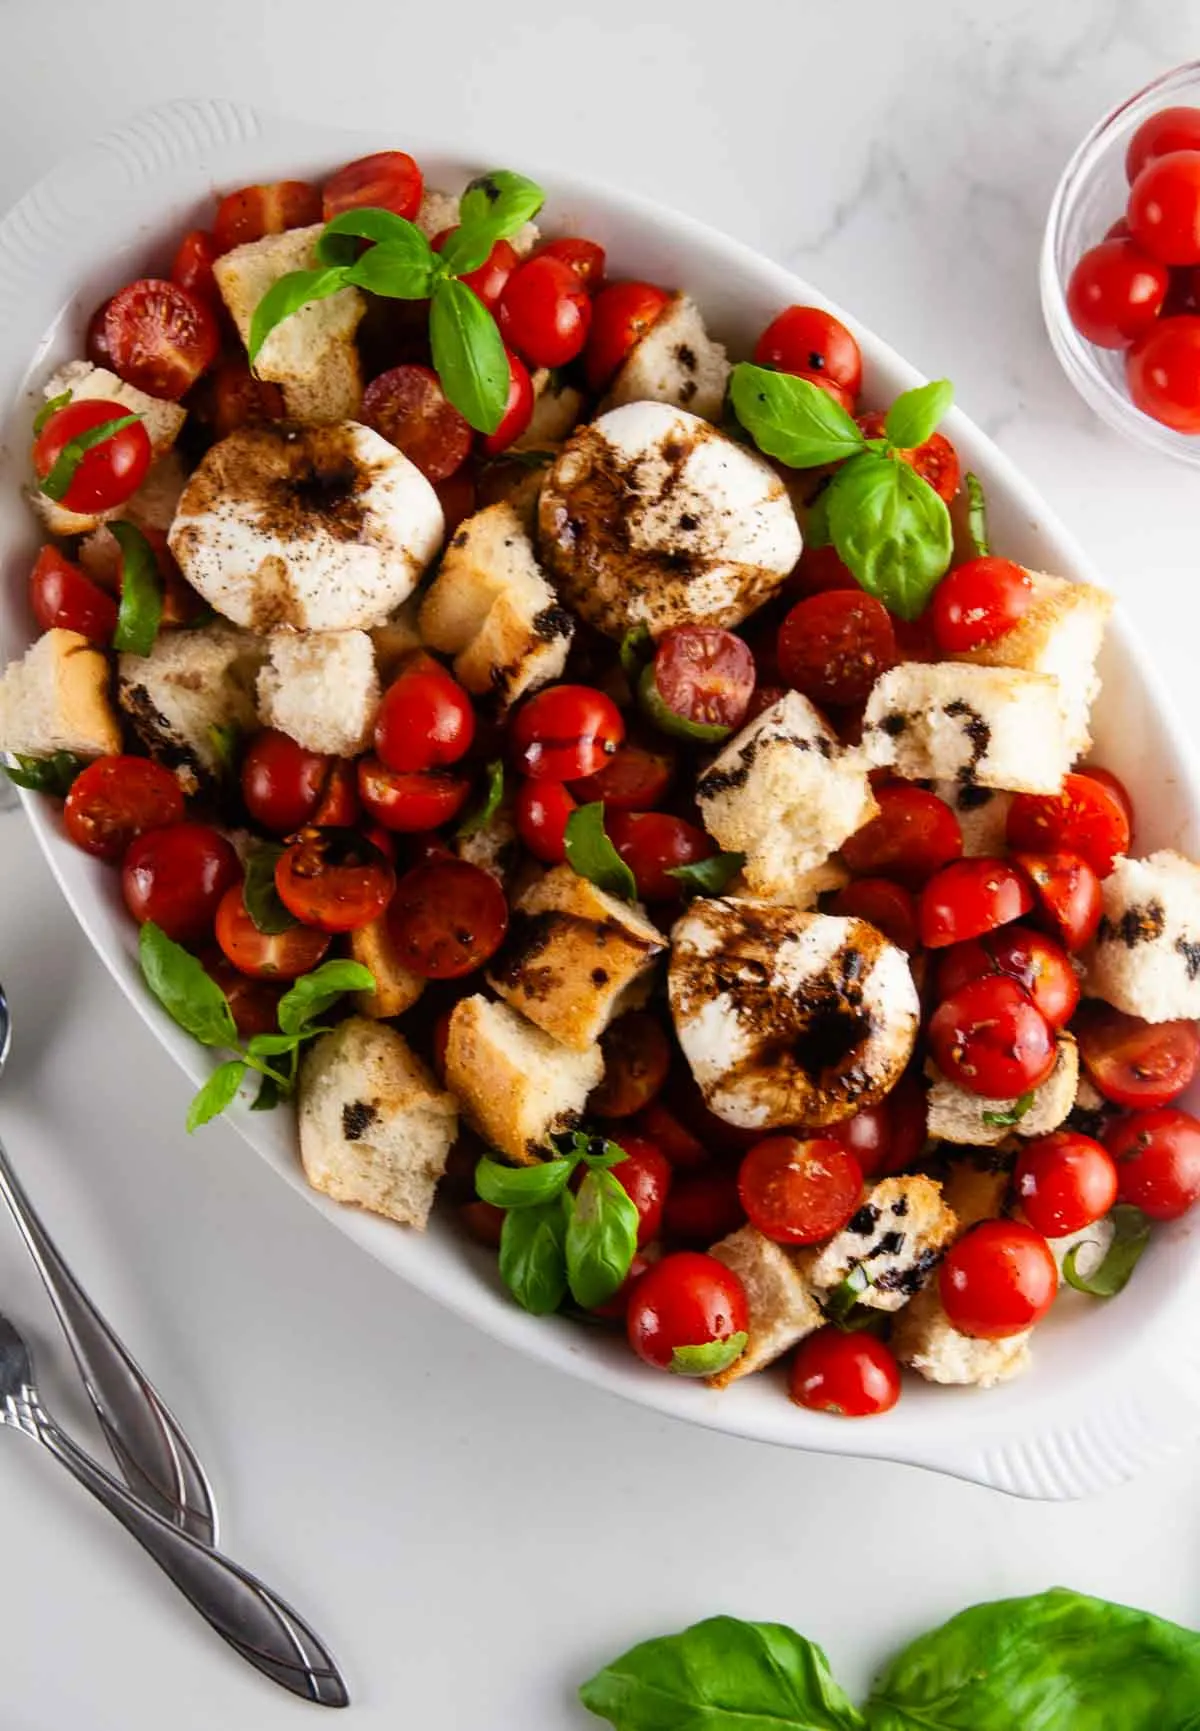 Burrata panzanella salad is the best kind of salad! This rustic salad is one made solely of creamy burrata, toasted pieces of Italian bread, bright tomatoes, and slathered in tangy, sweet balsamic.